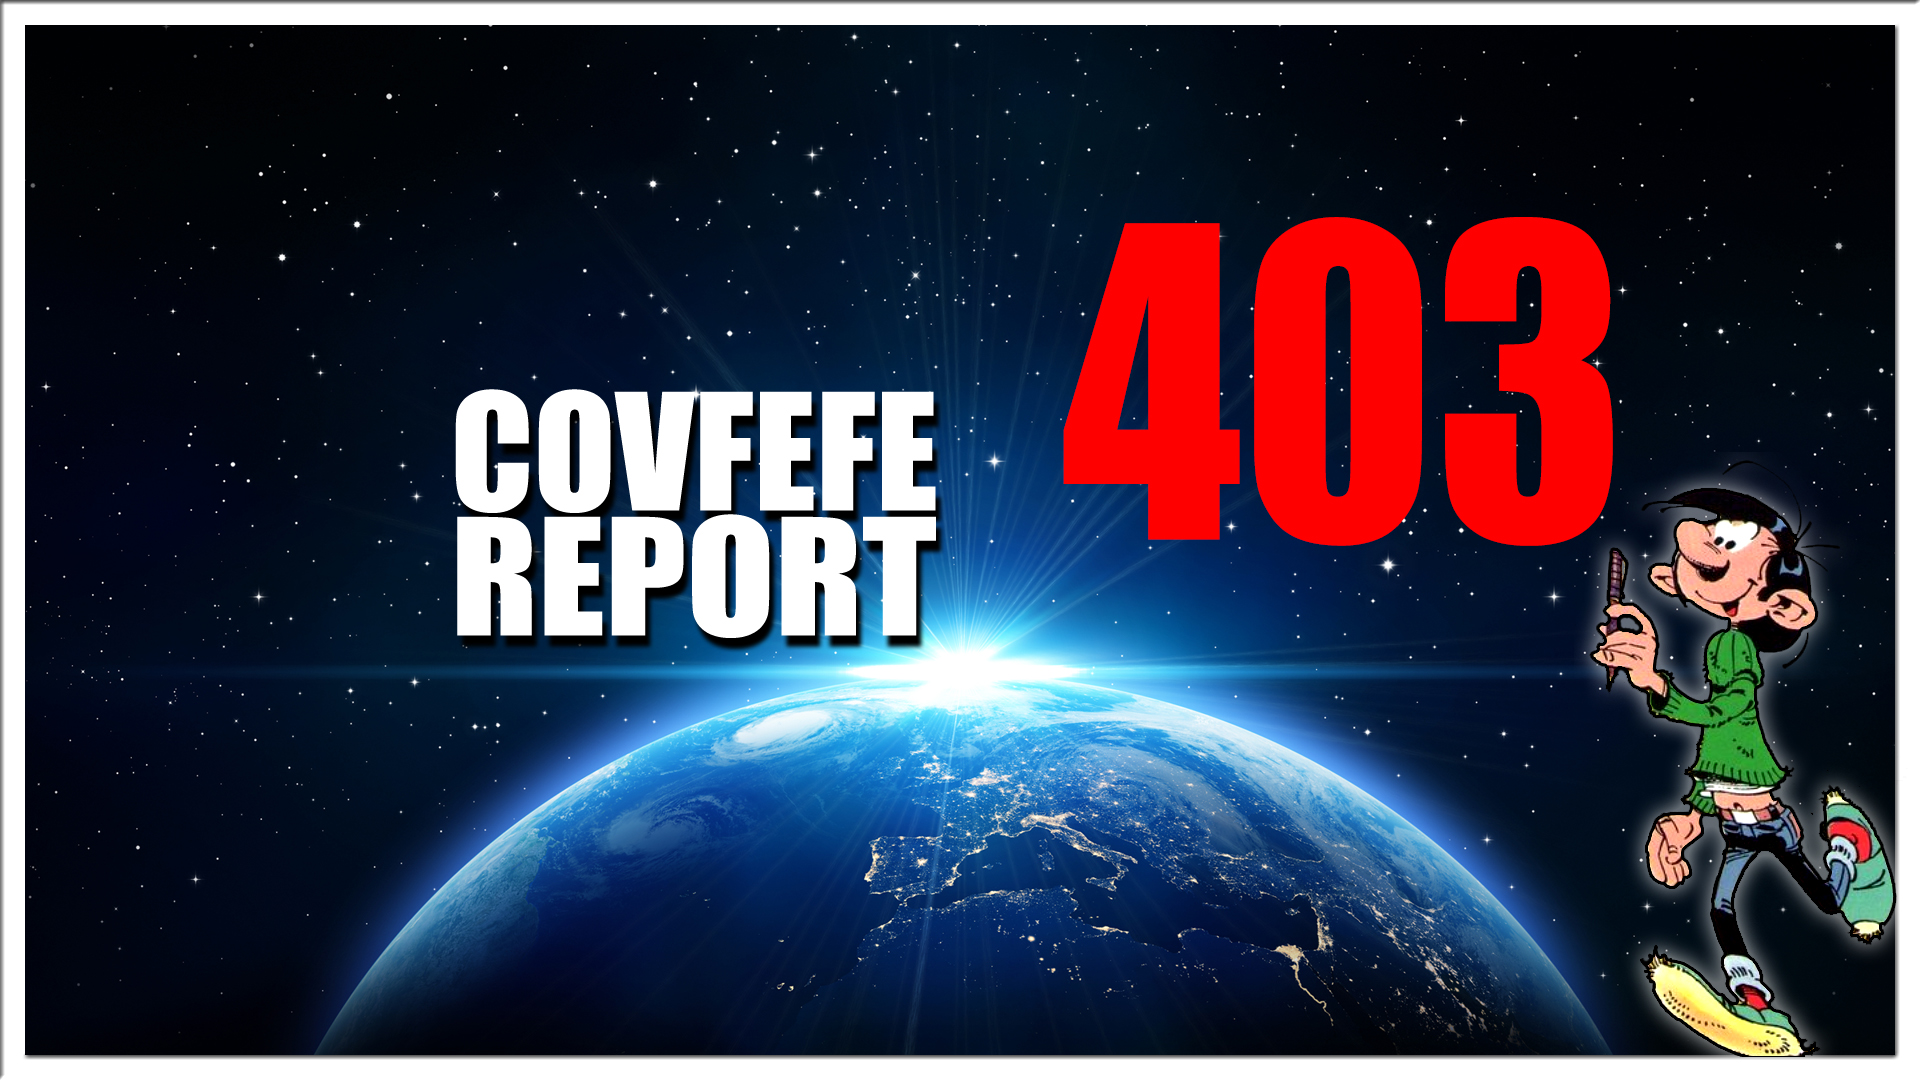 Covfefe Report 403. Clock activated, Roelie Post,  Henriette Nakad, Dr. Urso